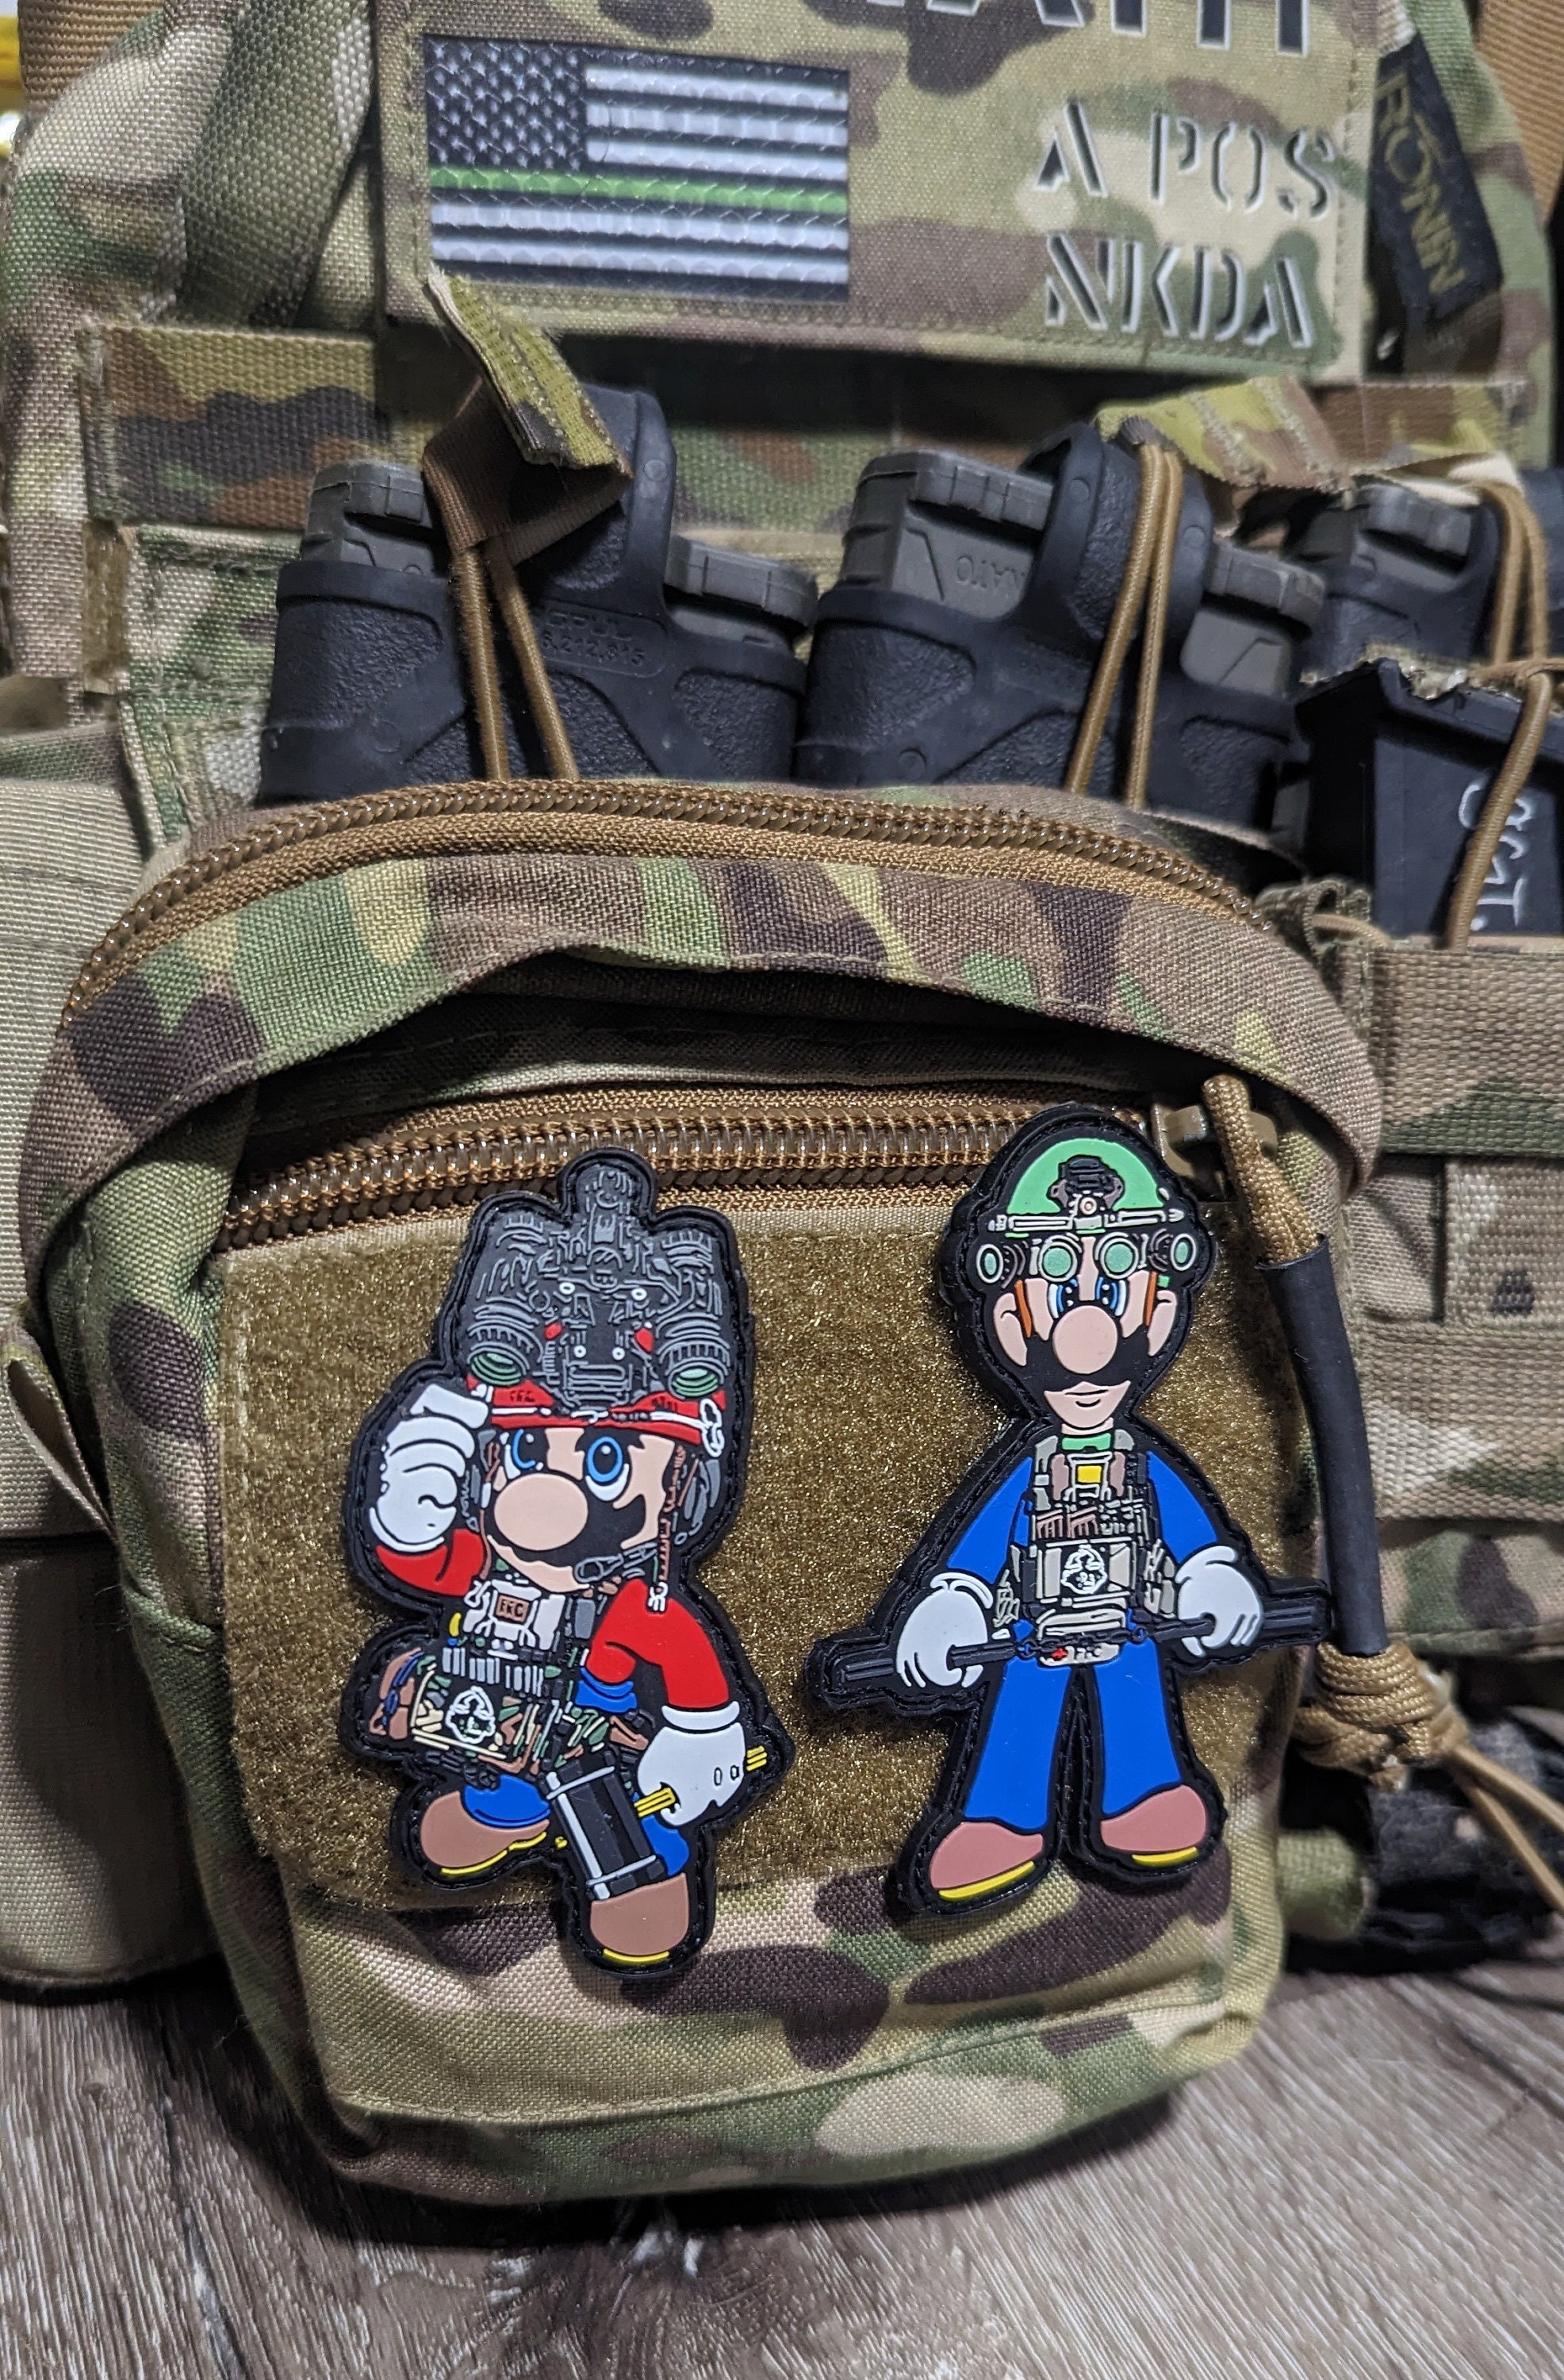 Tactical Morale Patch Mr Bone's Wild Ride for EDC Military Gear